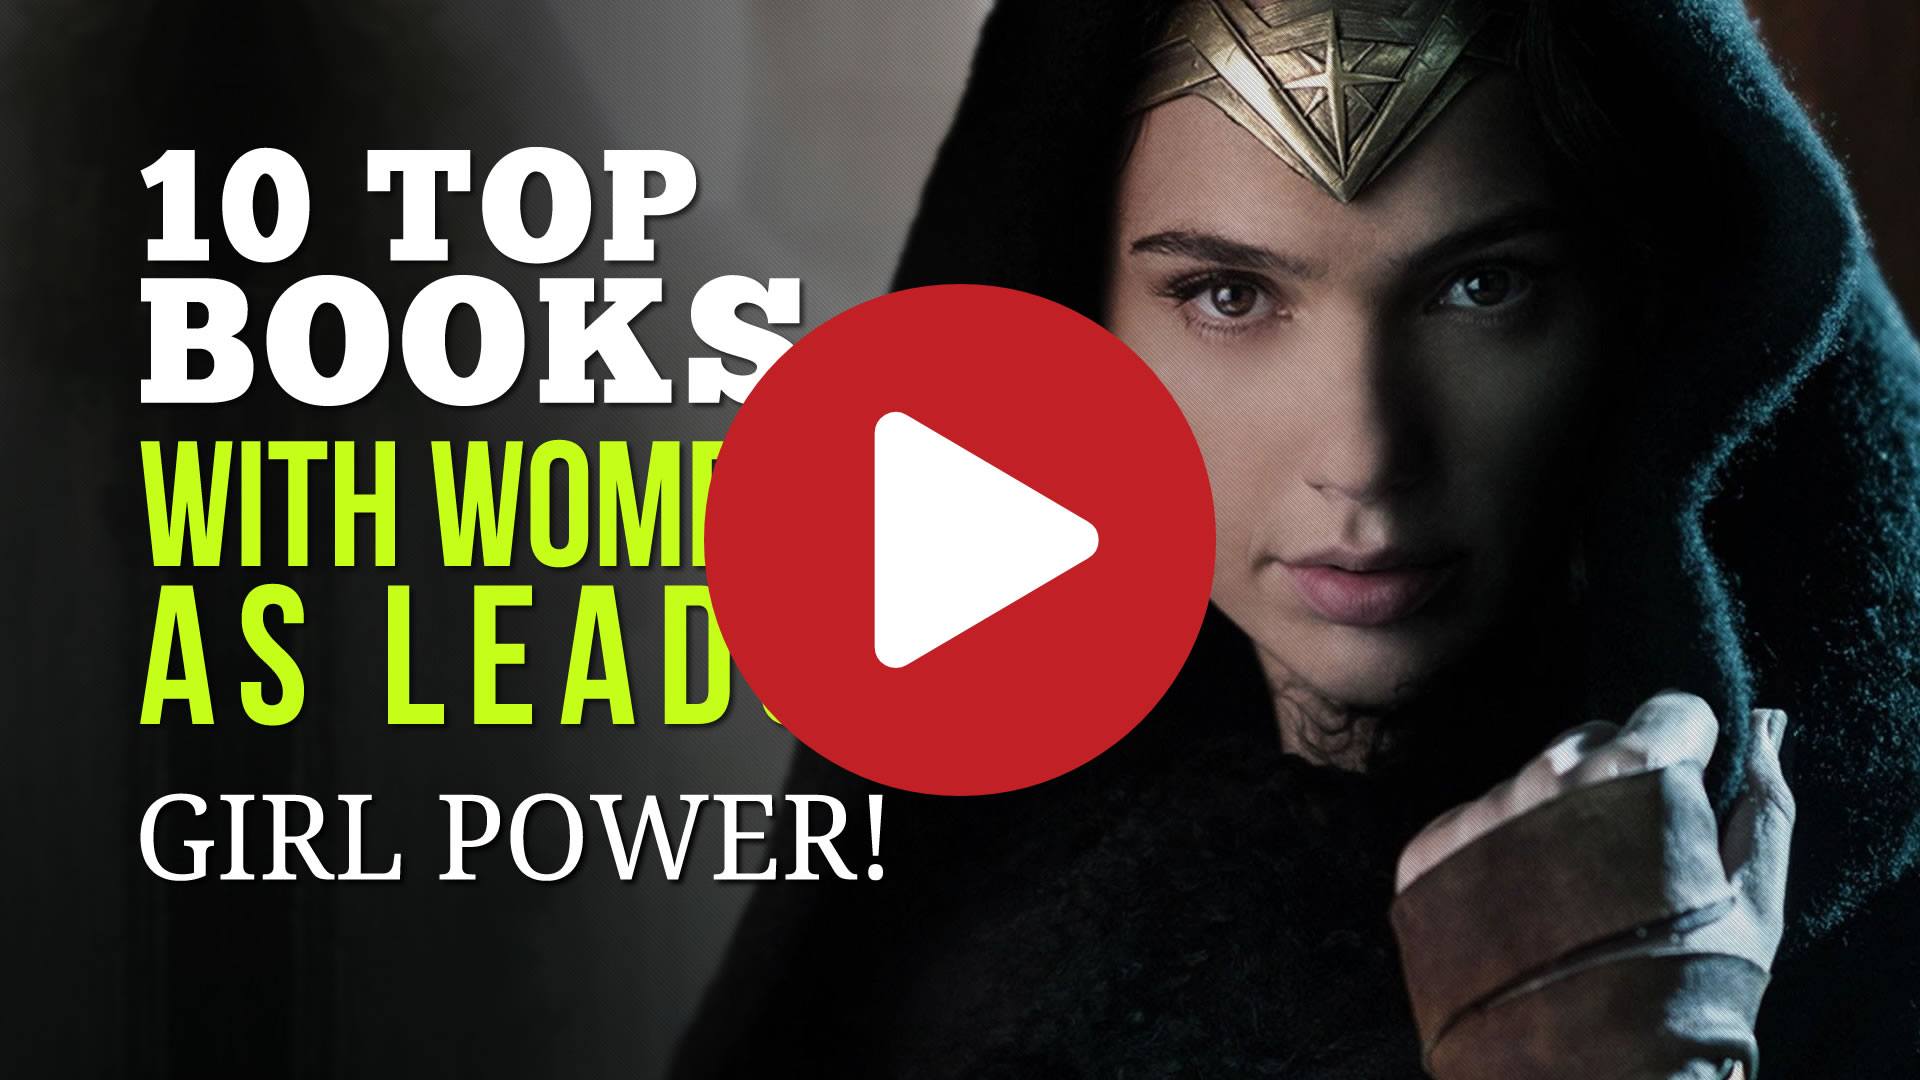 10 Top Books with Women as Leads - Amazing Stories with Girl Power!